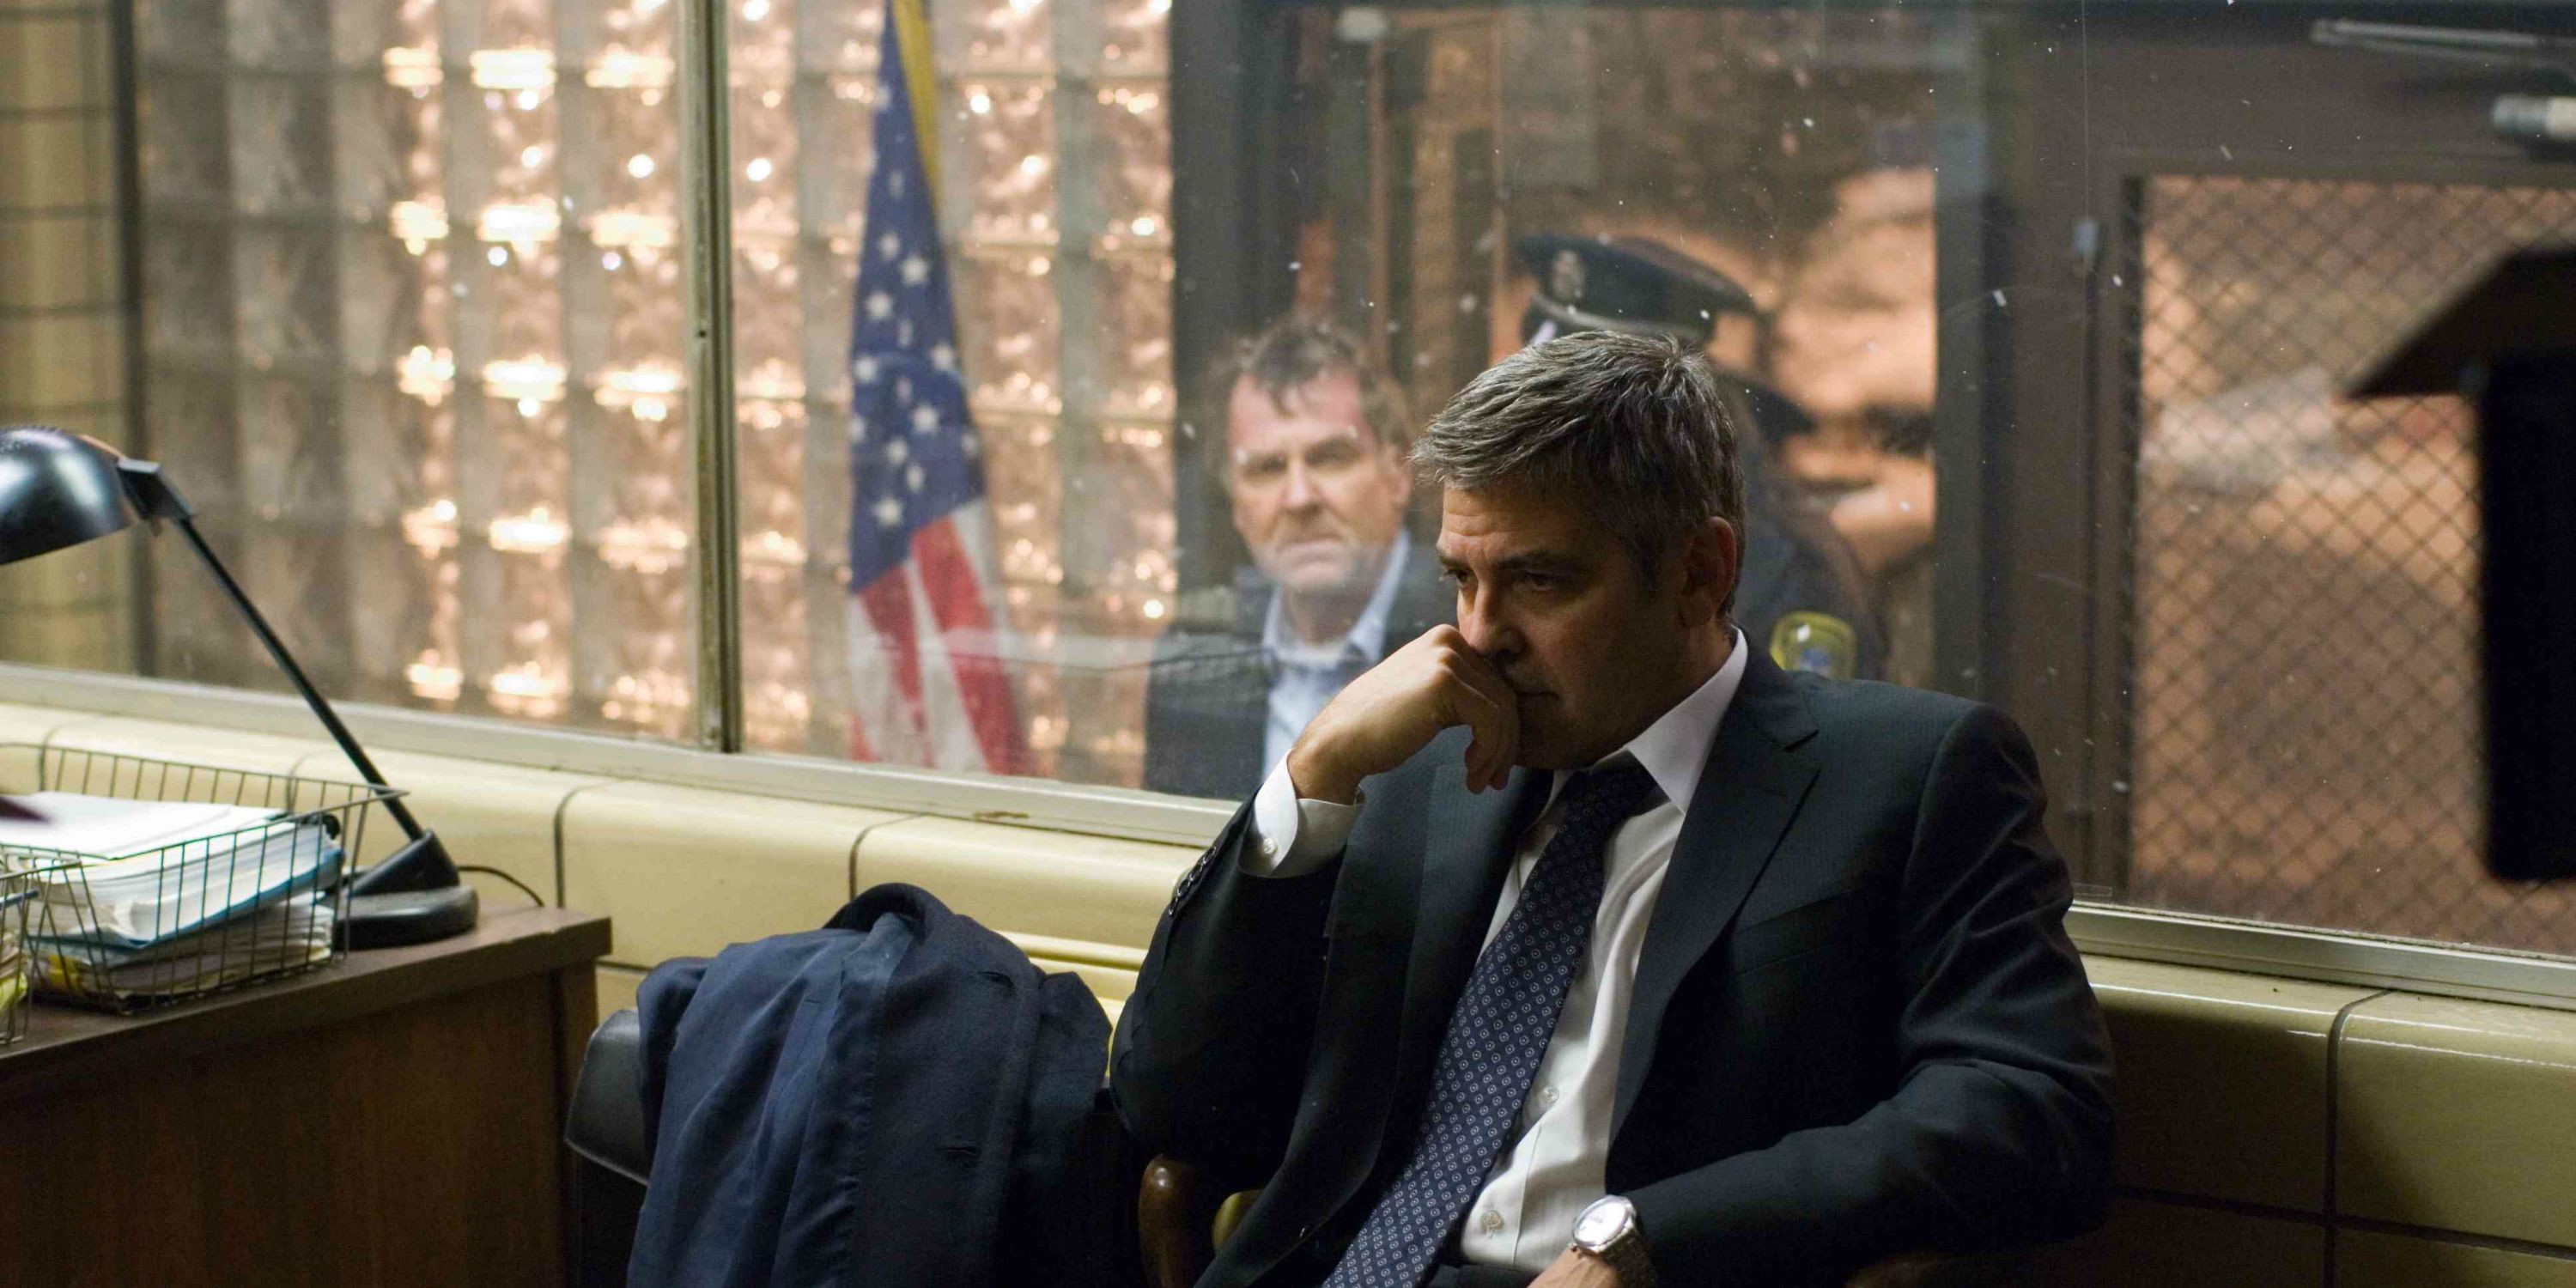 Tom Wilkinson as Arthur Stares at George Clooney as Michael in Michael Clayton